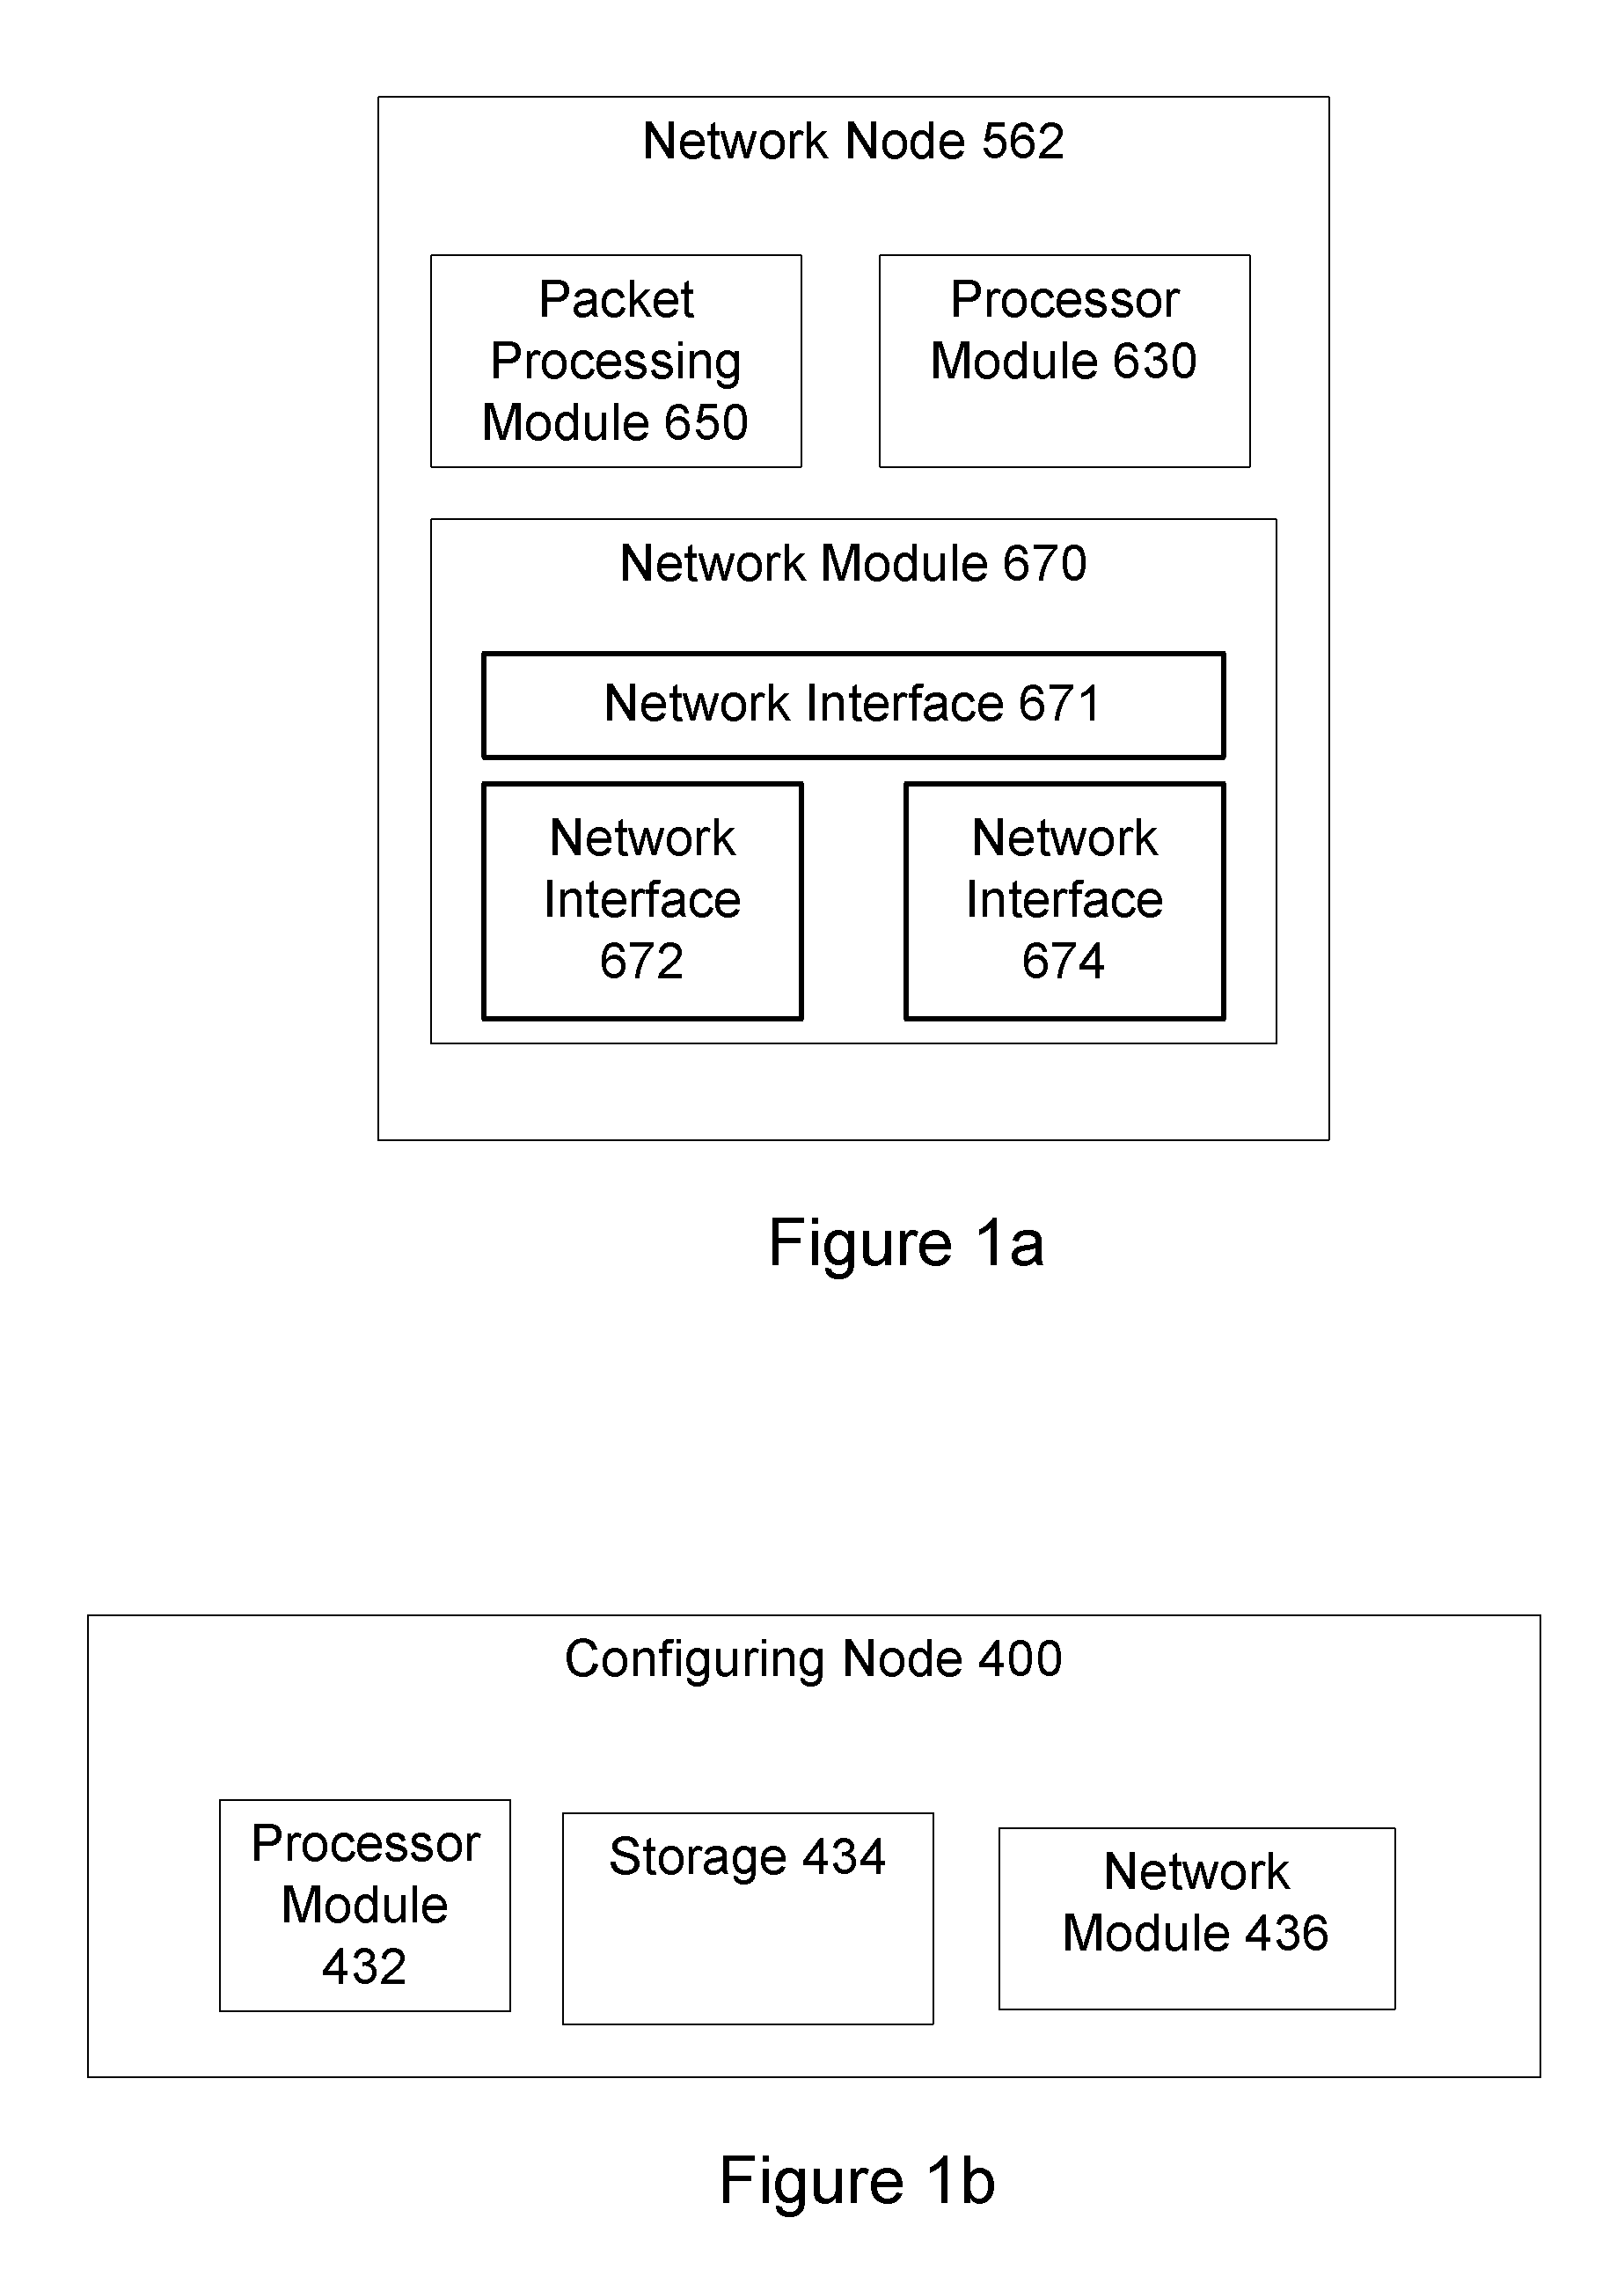 Configuration of a virtual service network